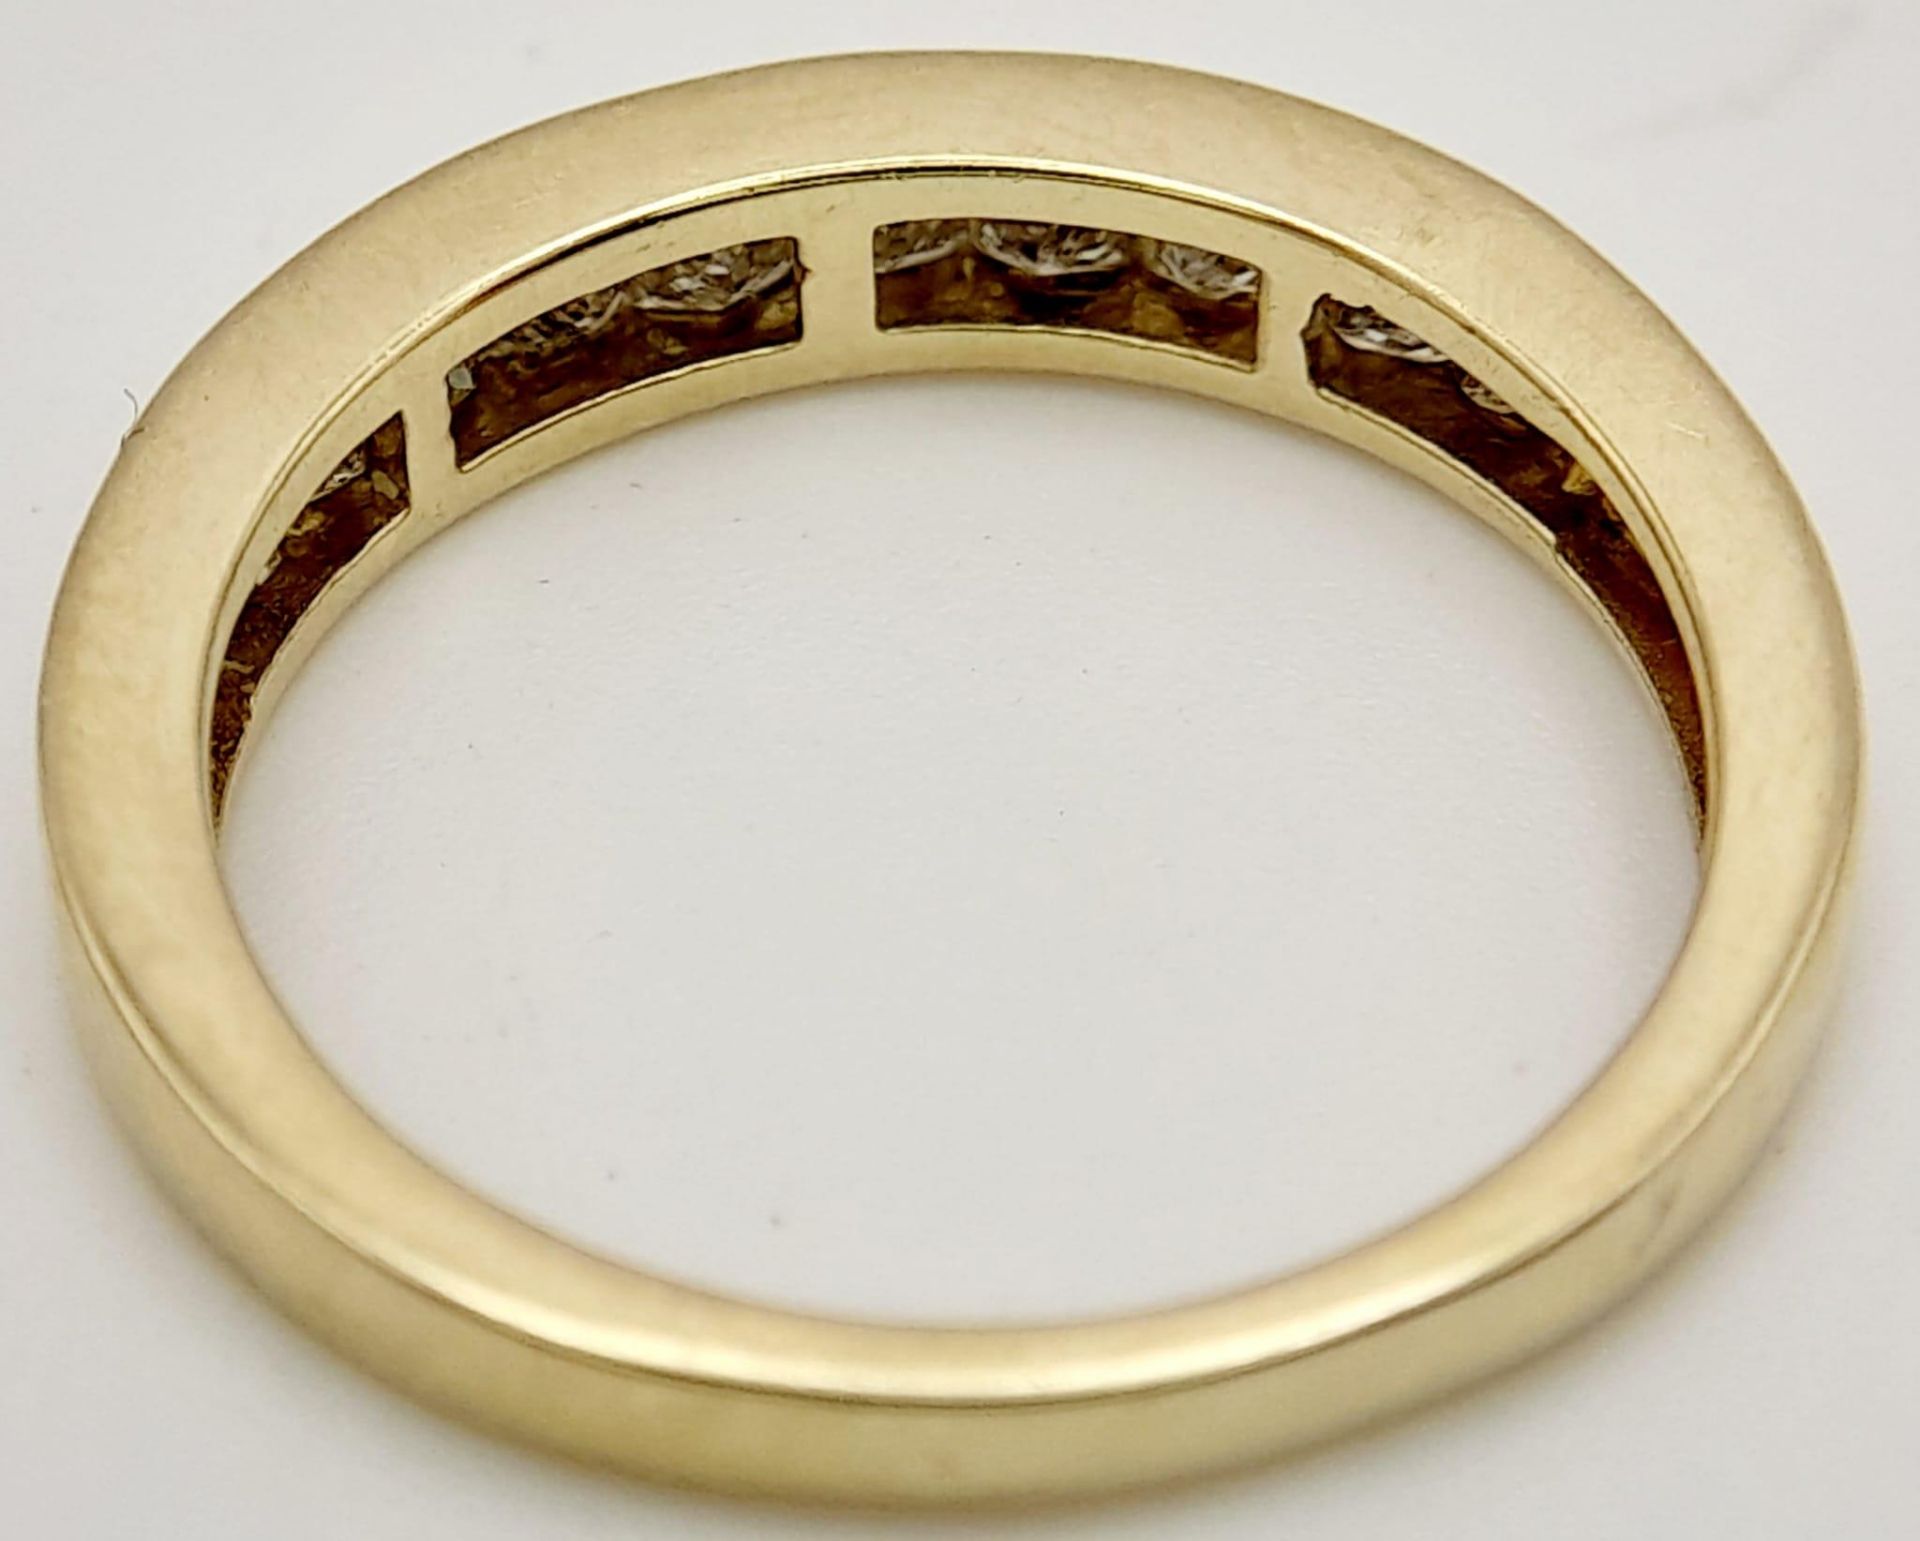 A 9K Yellow Gold Diamond Set Half Eternity Ring. 0.40ctw, Size N, 2.5g total weight. Ref: 8419 - Image 4 of 7